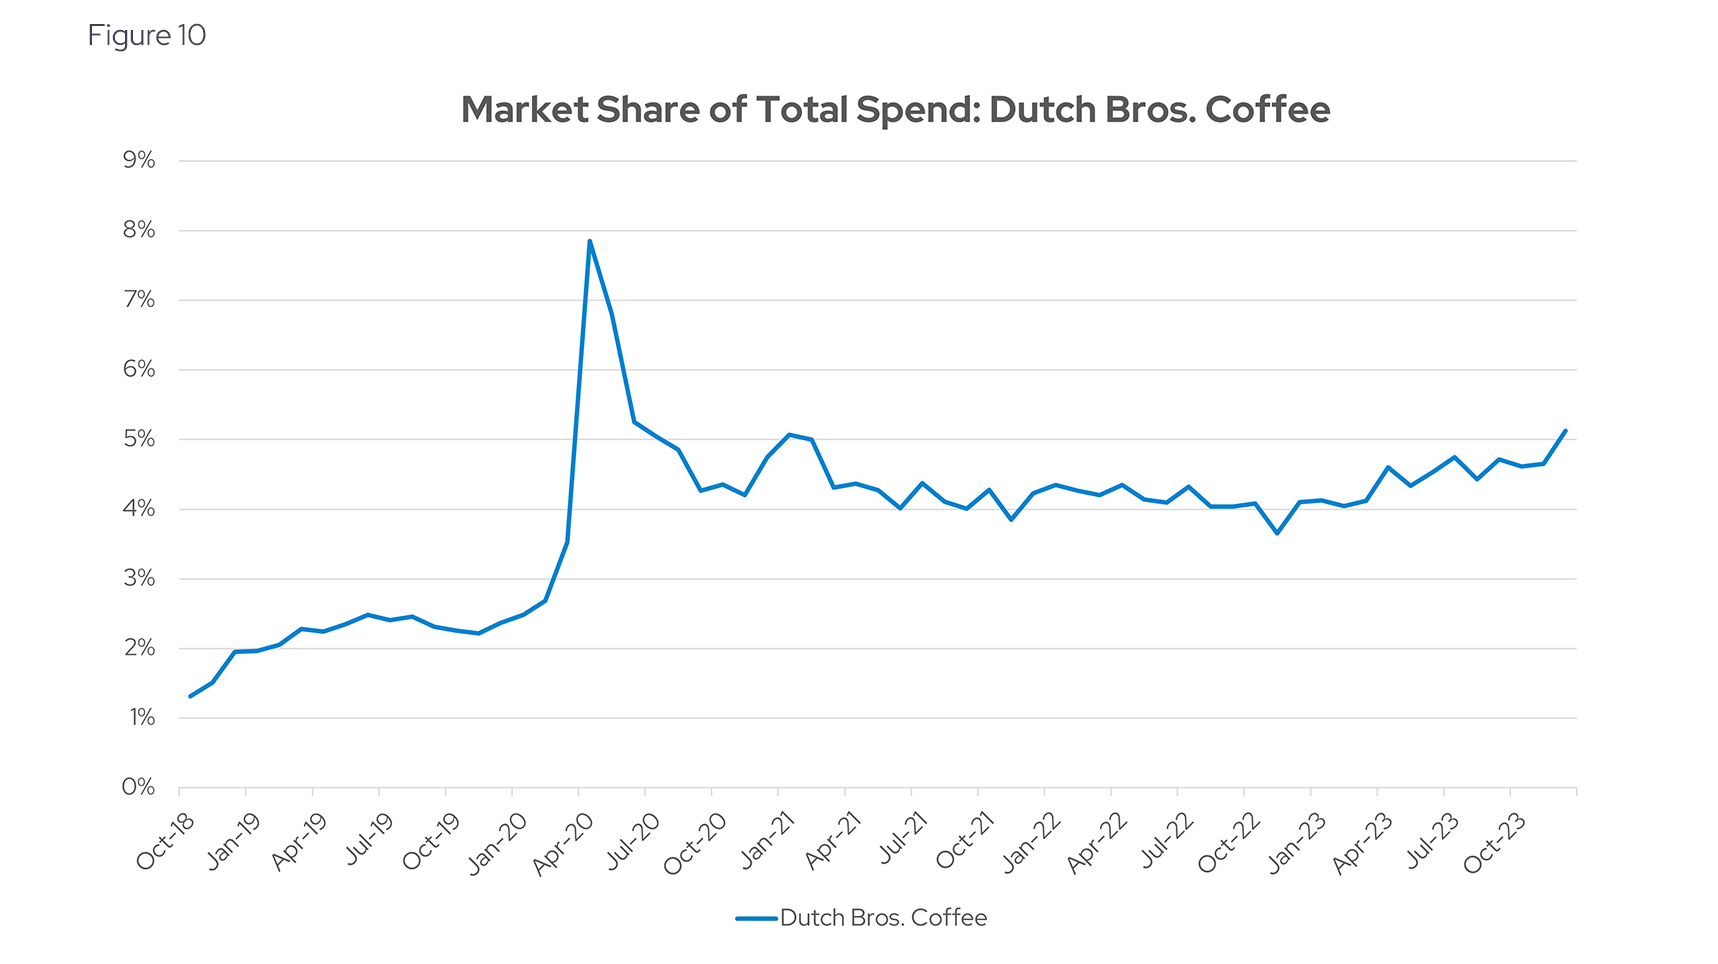 Market Share of Total Spend: Dutch Bros. Coffee